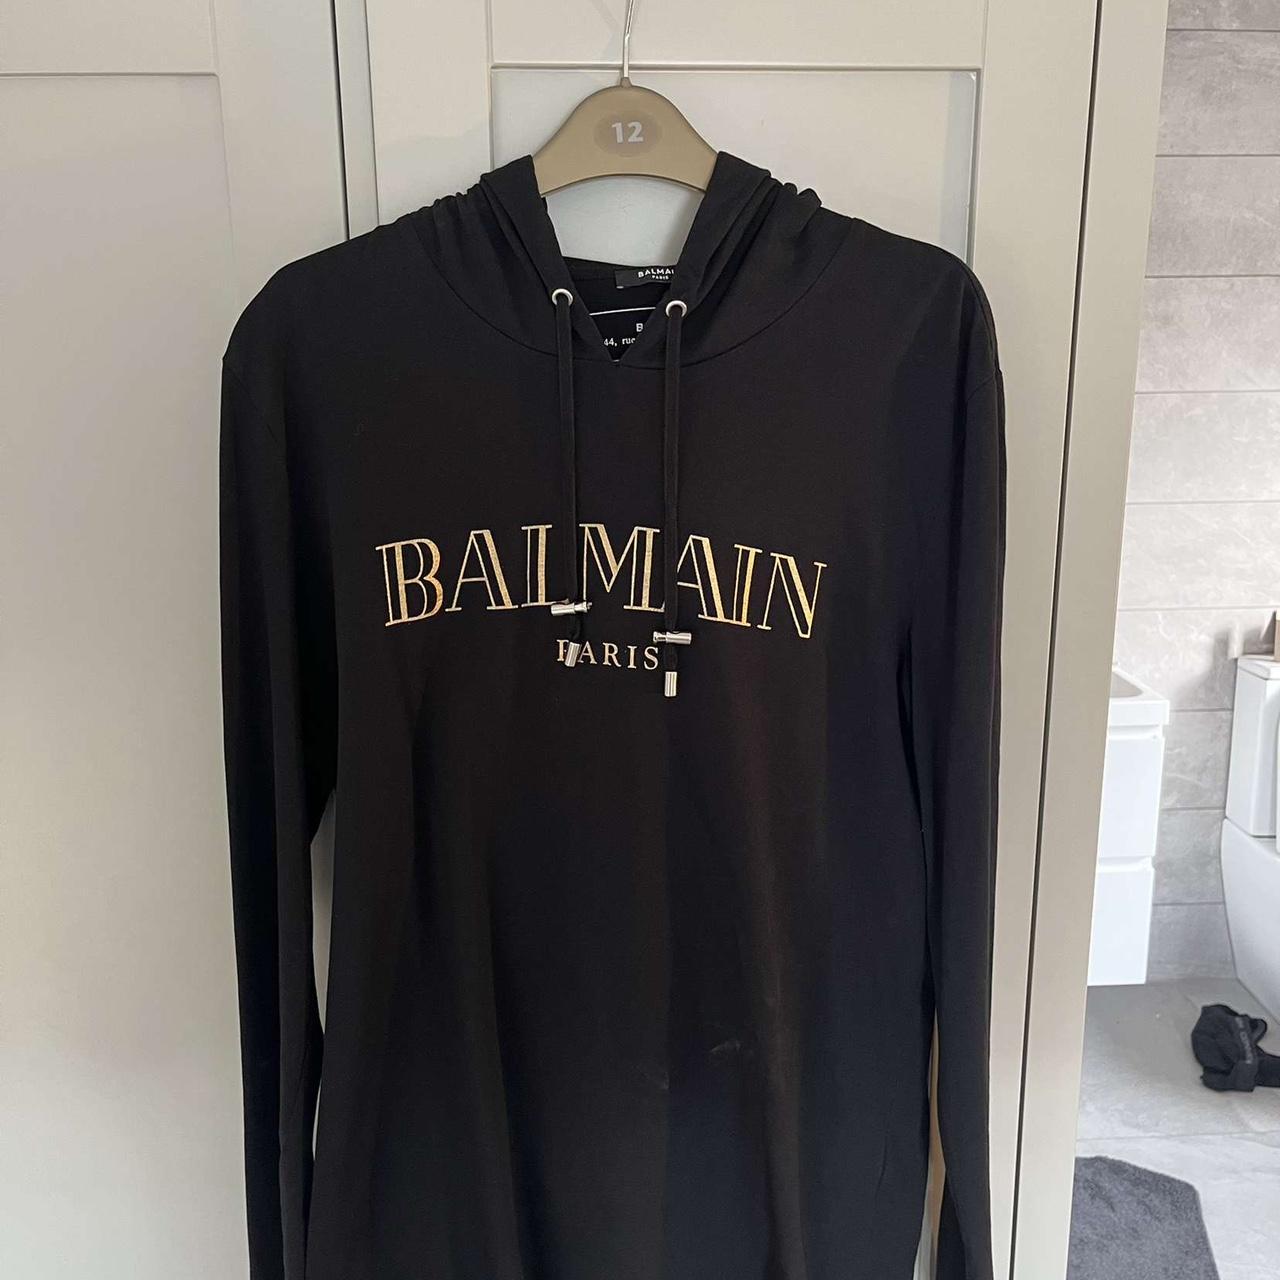 Balmain Black and Gold Hoodie Bought for 295 - Depop